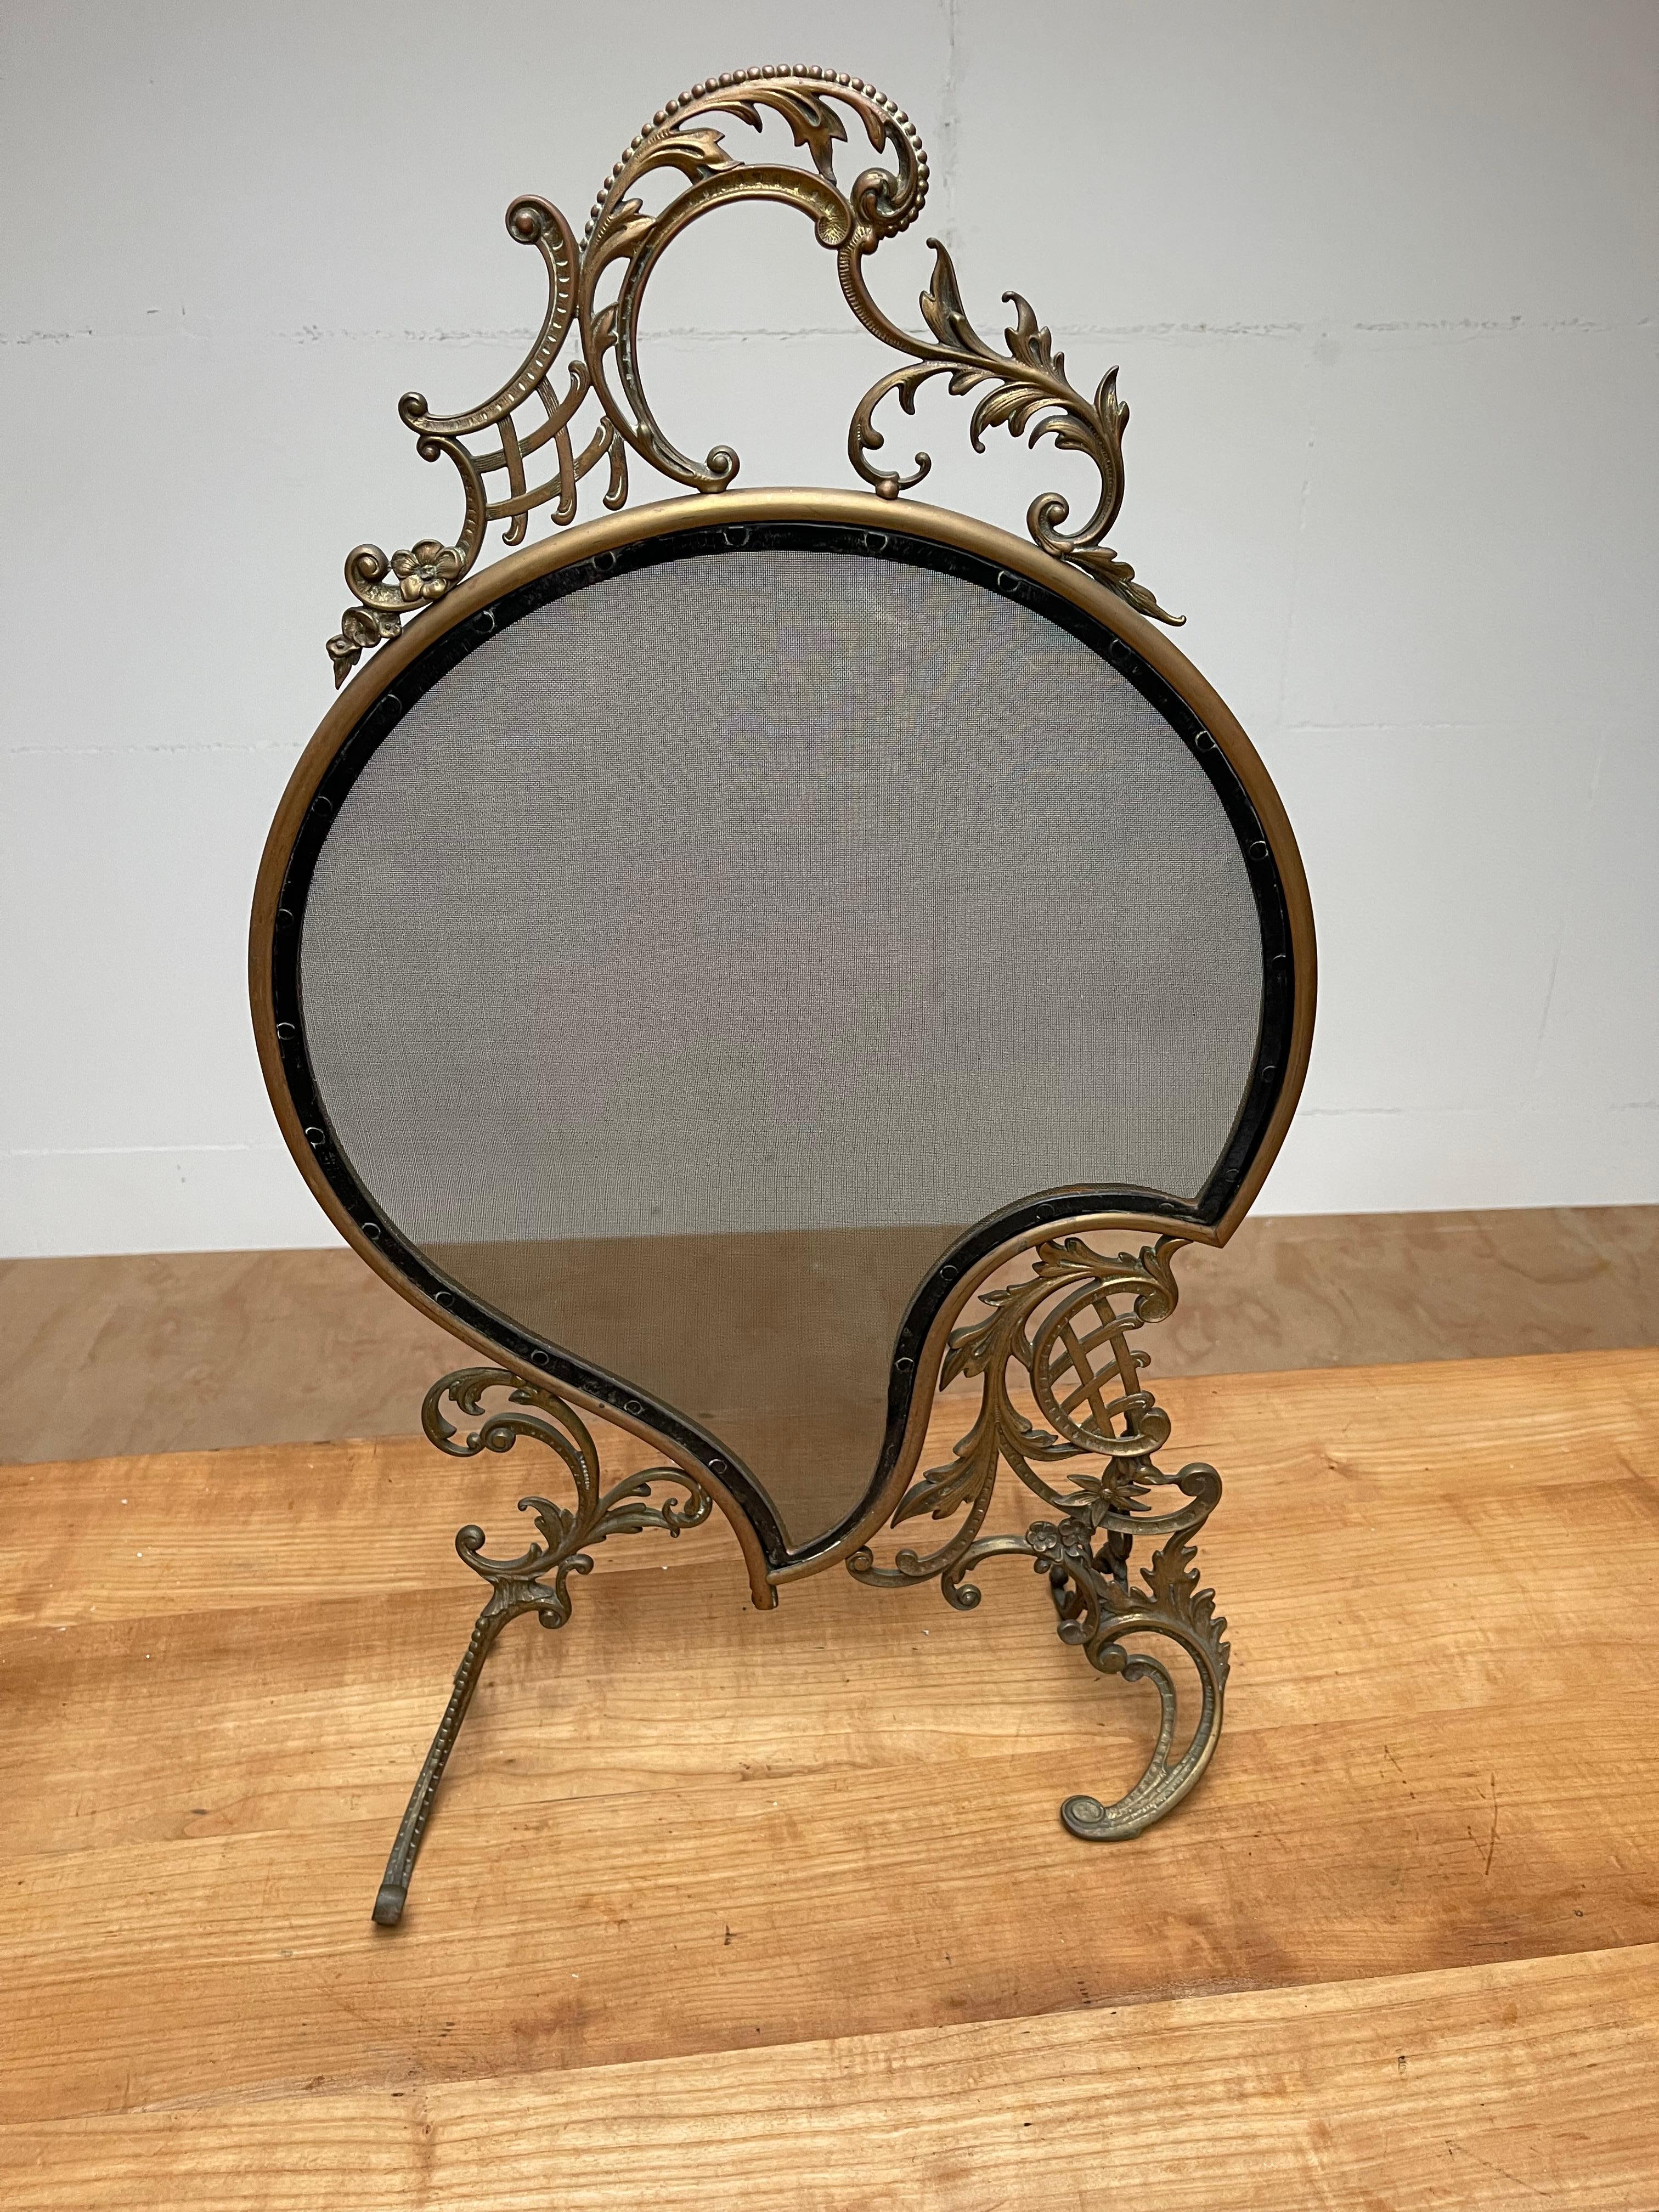 This antique French fire screen has amazing details..

If this beautifully handcrafted, circa 1910 fire screen is the right style to fit your fireplace and the size is correct for you as well then you could not wish for a better condition one. All